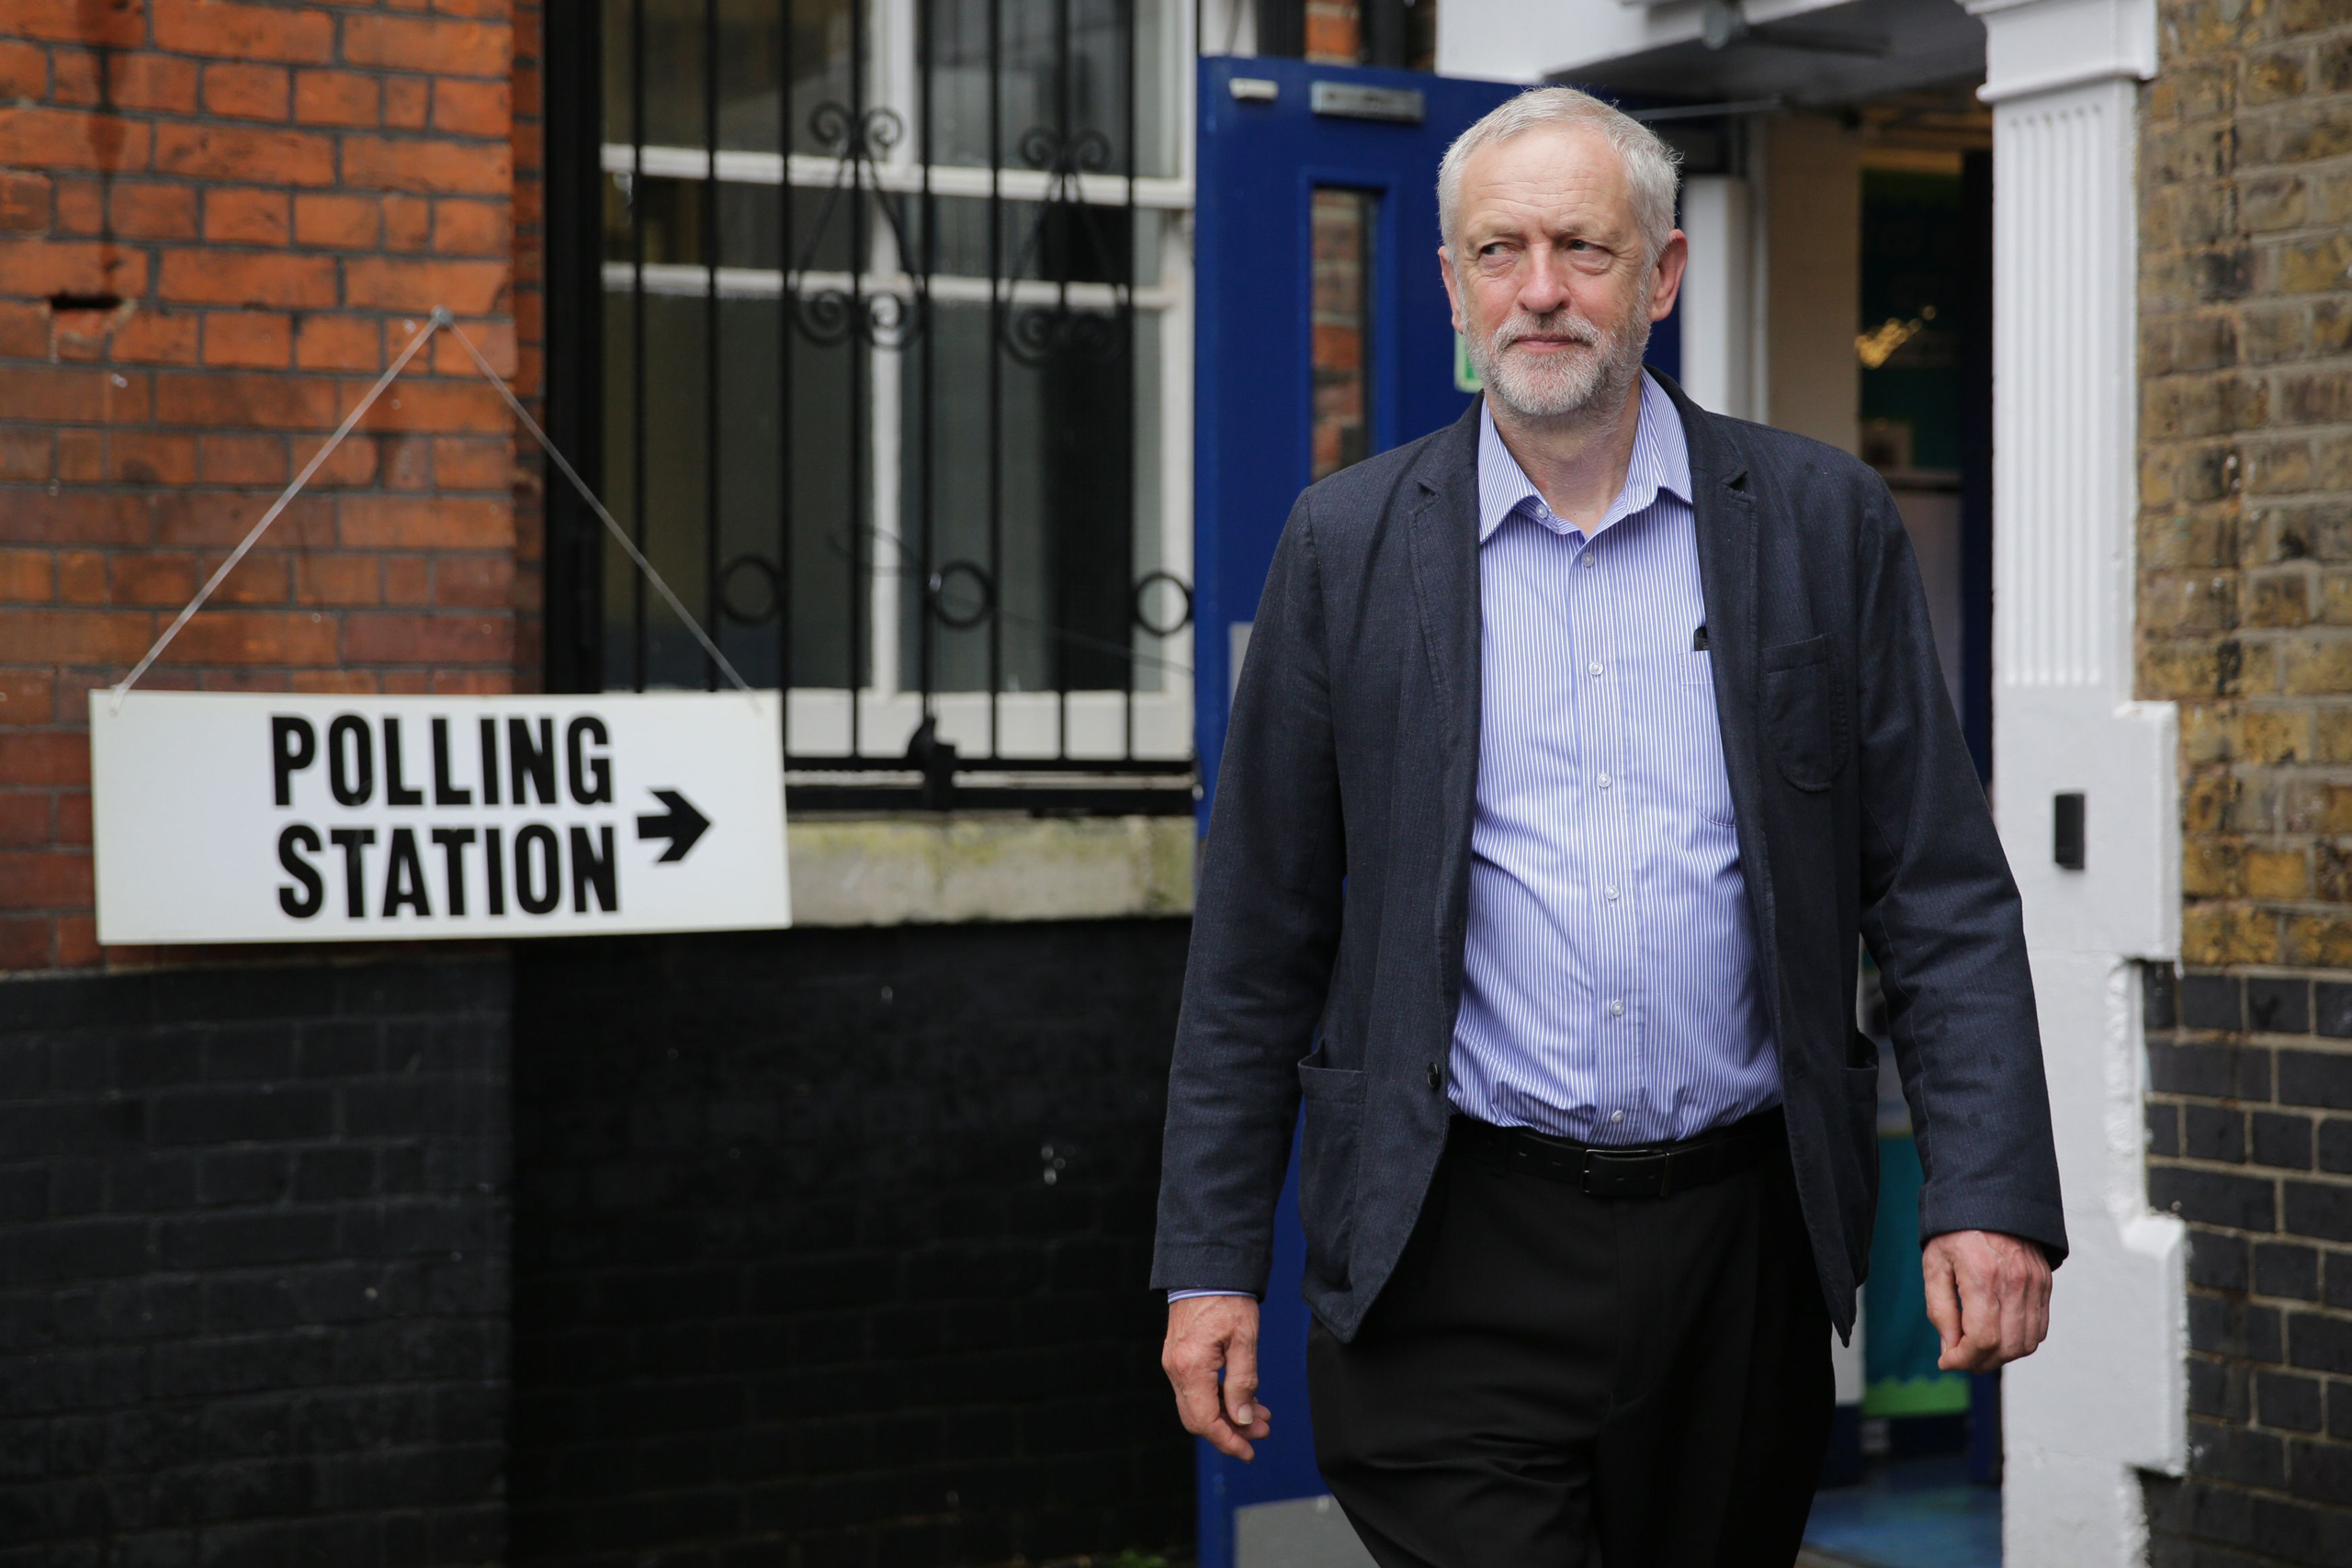 Labour Party leader Jeremy Corbyn leaves after casting his vote at a polling station in London on June 23, 2016 (Daniel Leal-Olivas—PA Wire/Press Association Images)